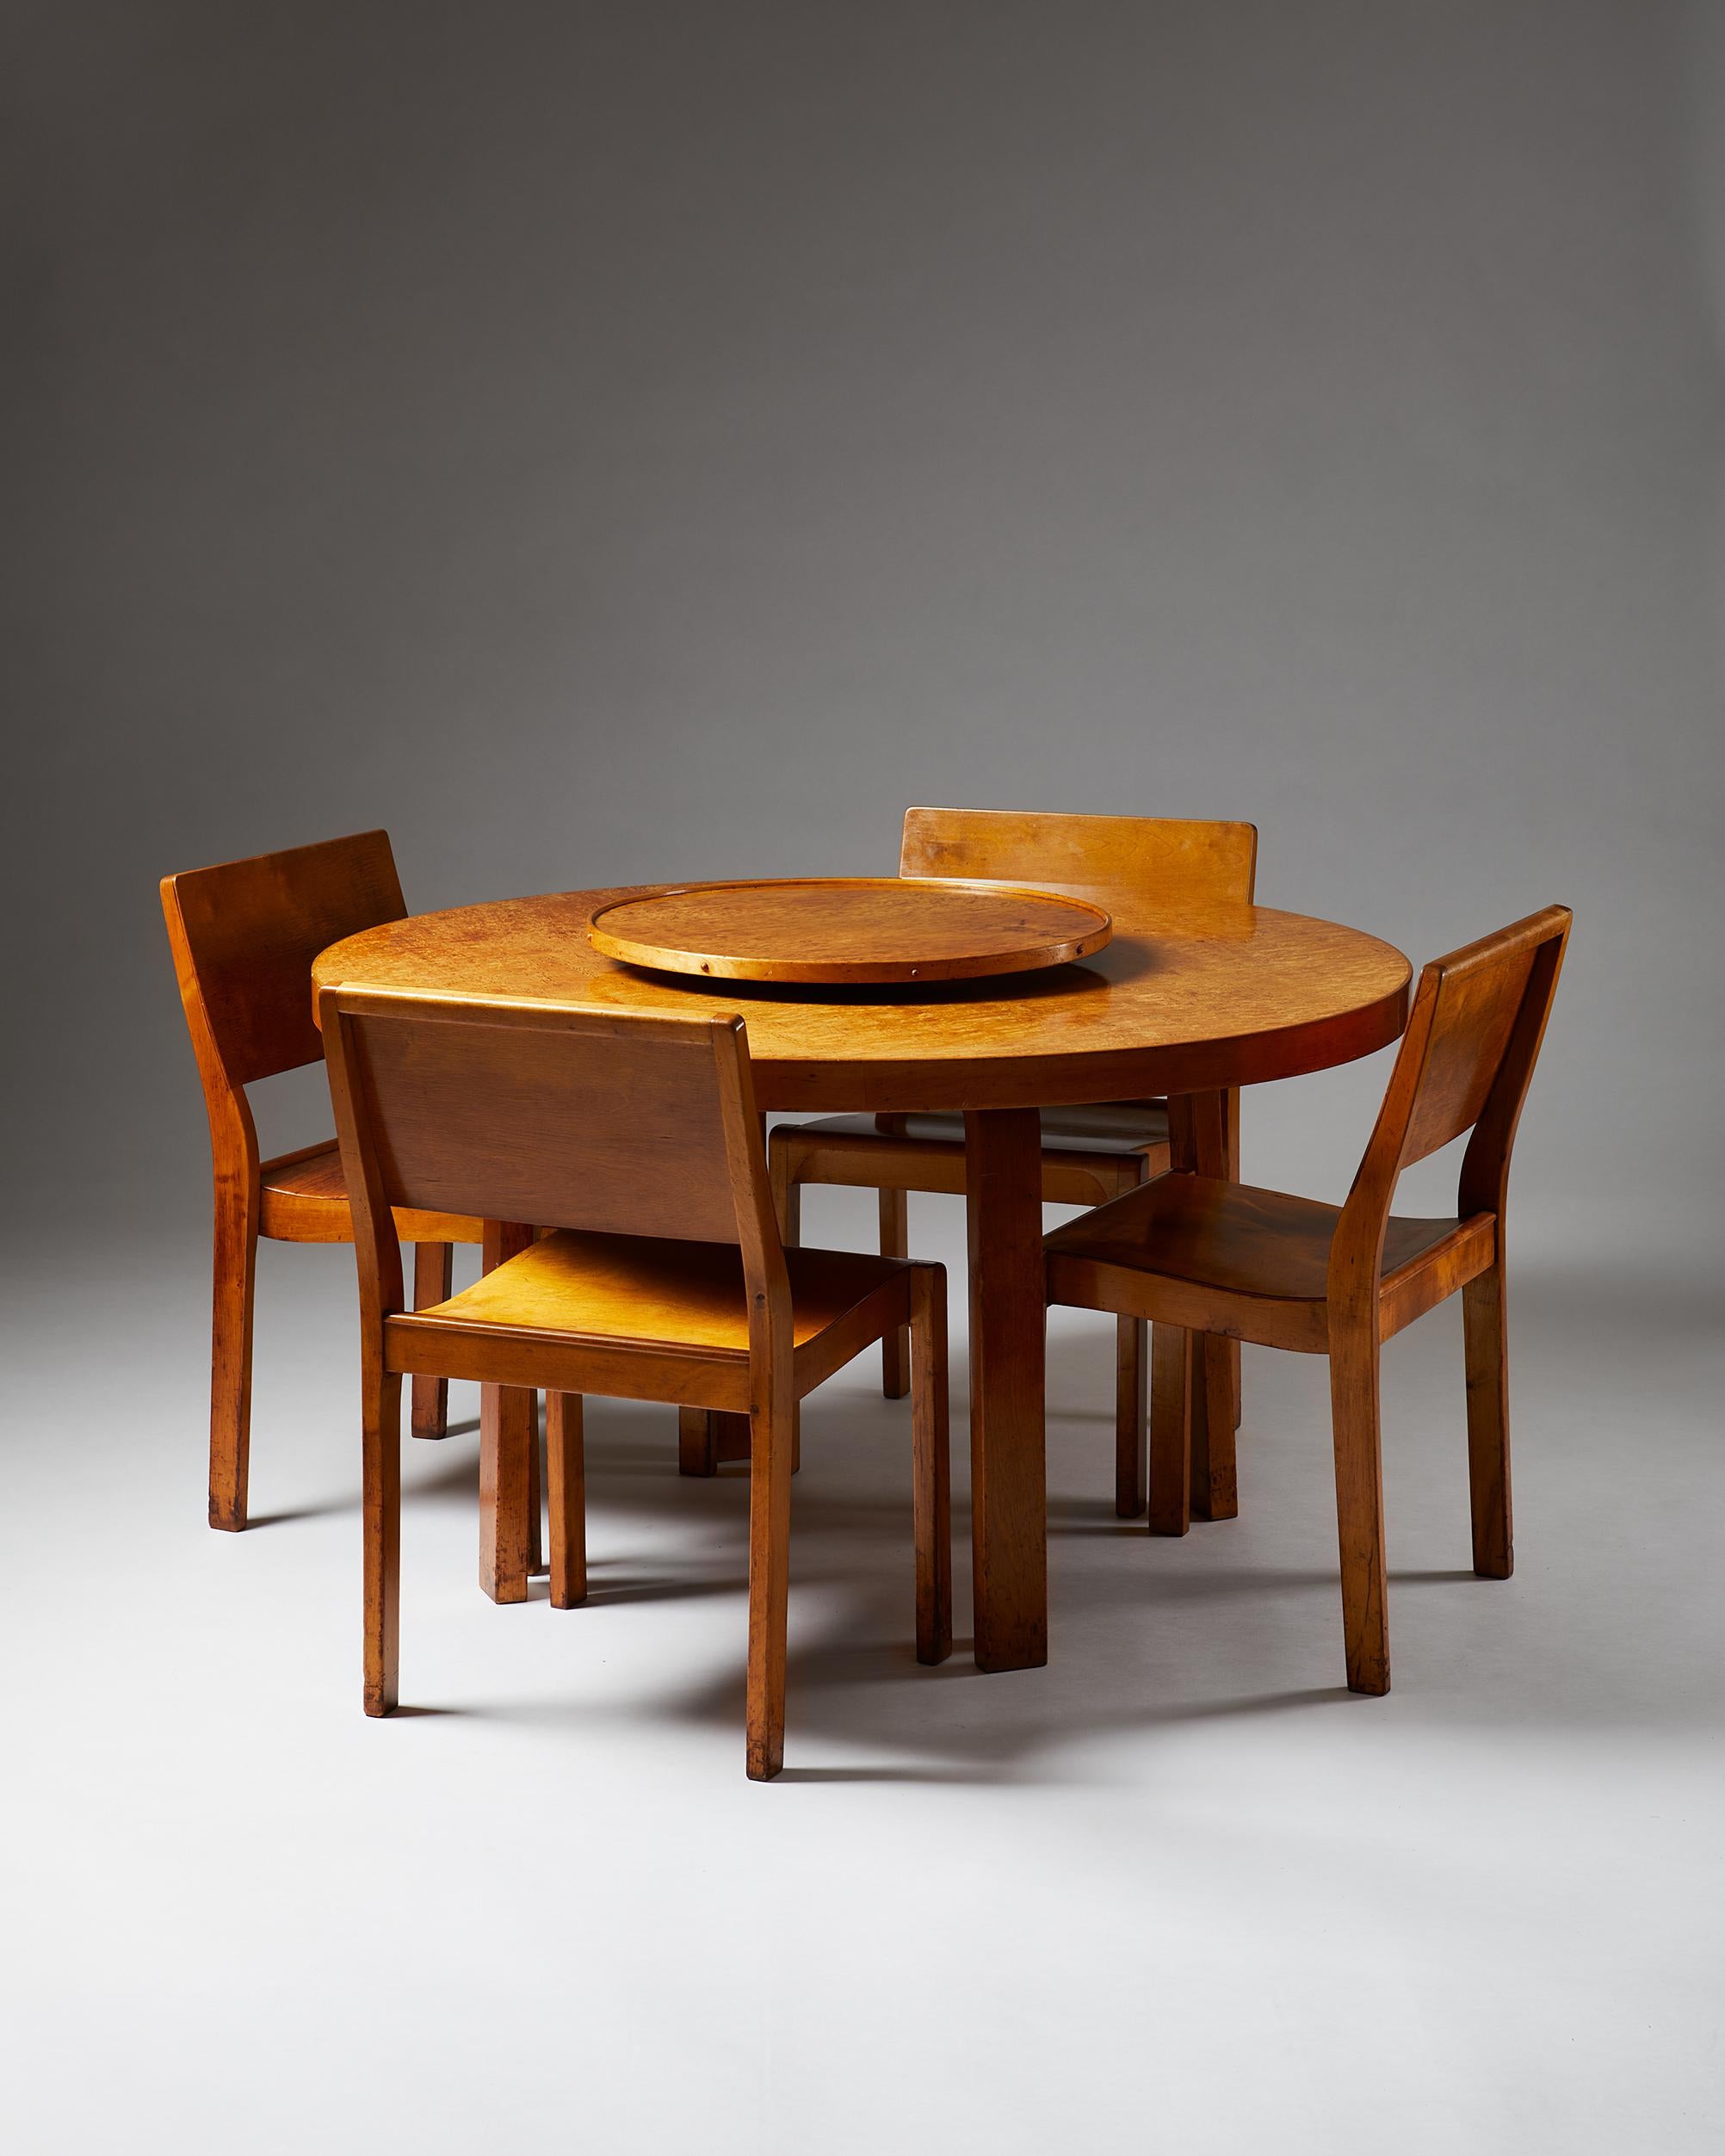 Dining set designed by Alvar Aalto for Finmar Ltd.,
Finland, 1929-1935.
The set consists of a table 91 and four 611 stacking chairs.

The tabletop and Lazy Susan veneered in Karelian birch. The chairs in birch.

All pieces with Finmar's